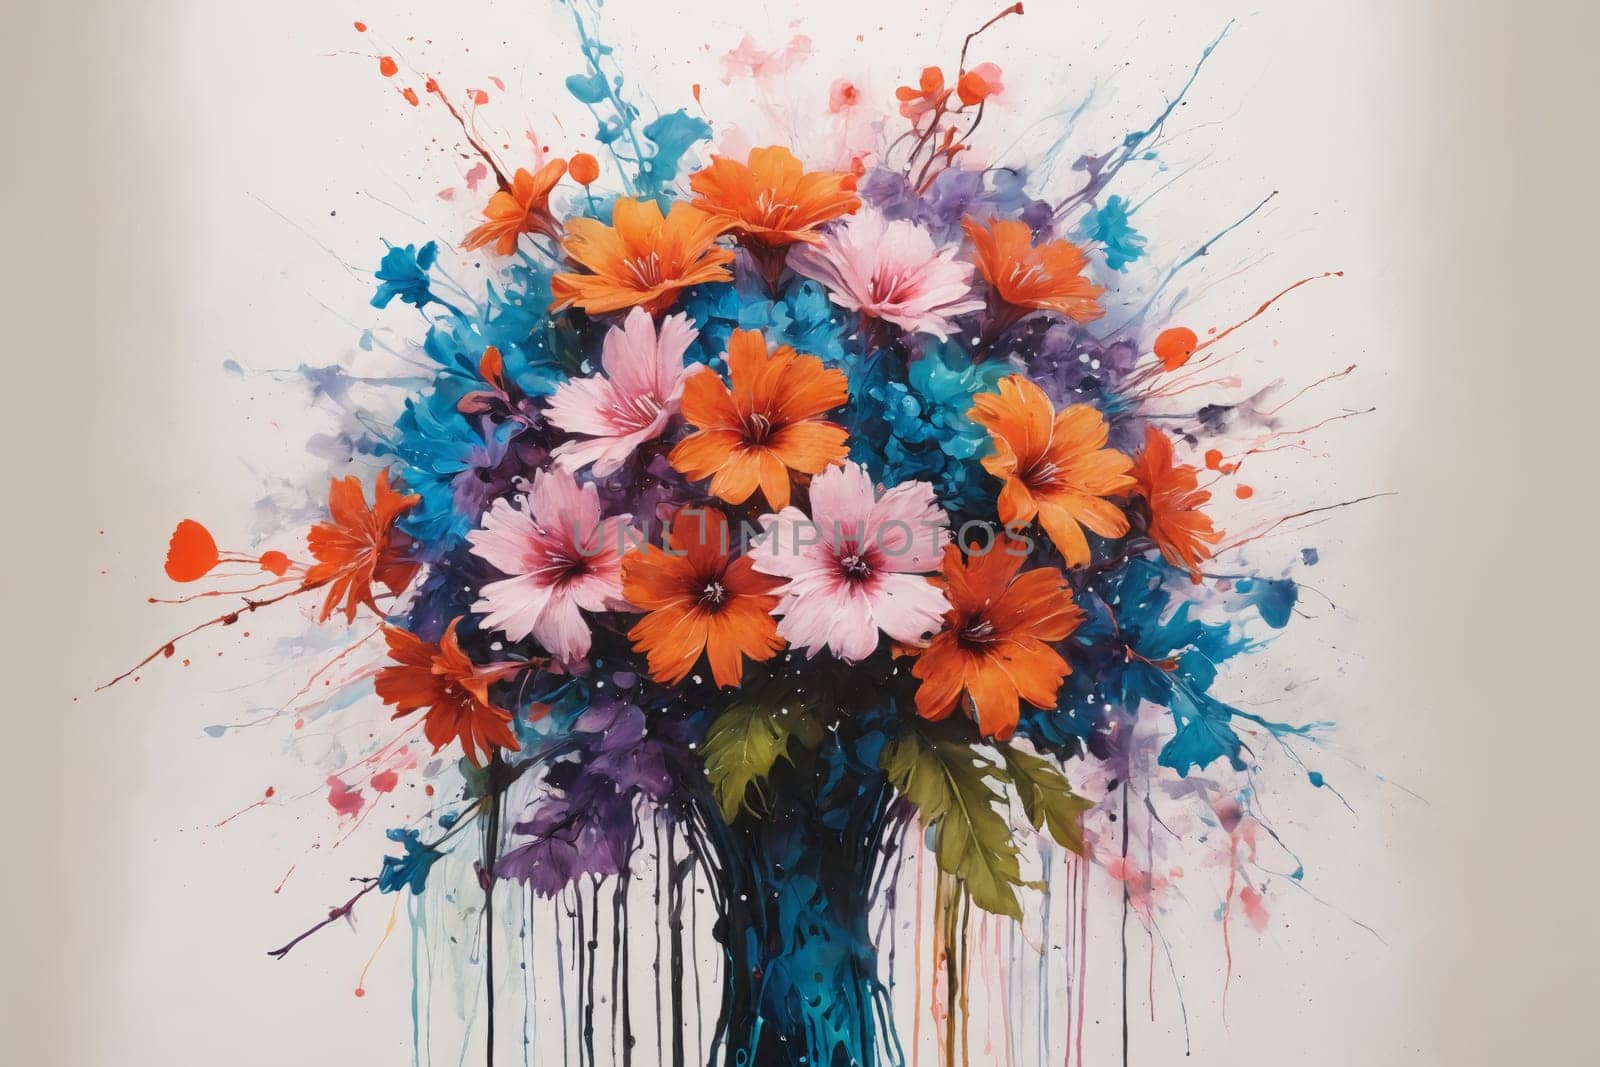 Celebrate the allure of flowers with an abstract rendering, featuring blooms in every hue of the rainbow. Ideal for those seeking a vibrant, refreshing departure from typical floral presentations.